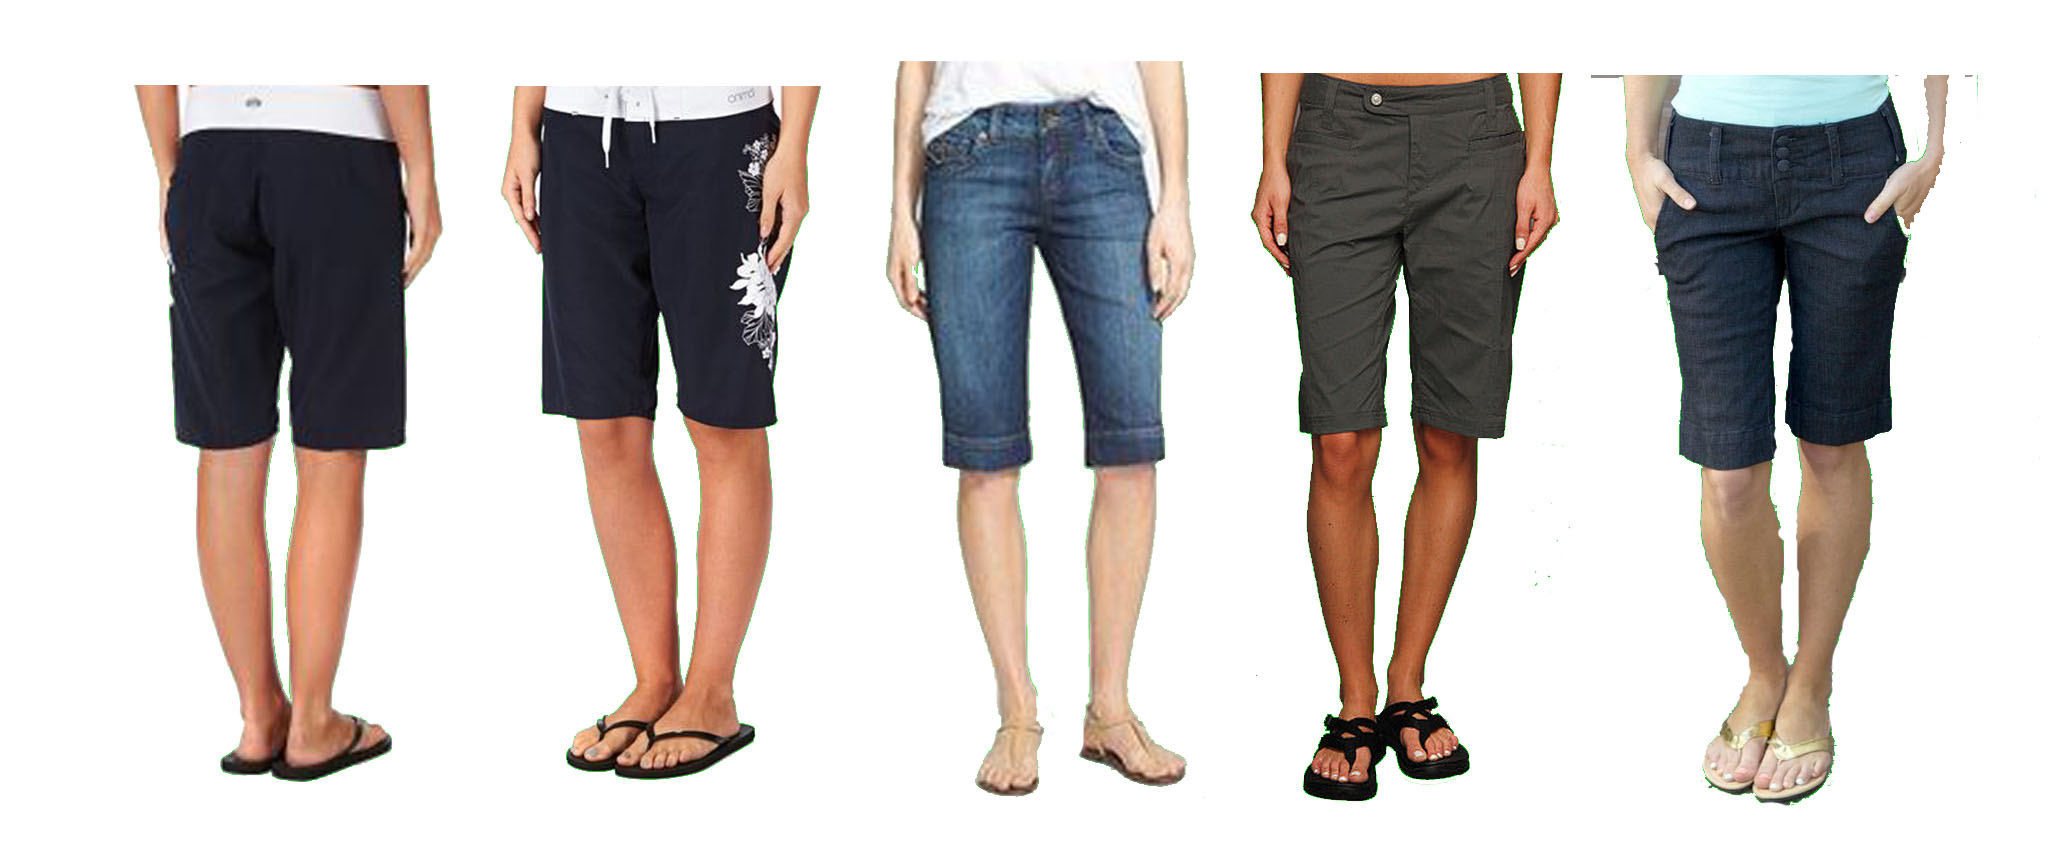 By insisting girls as young as four wear 'modesty shorts', we are